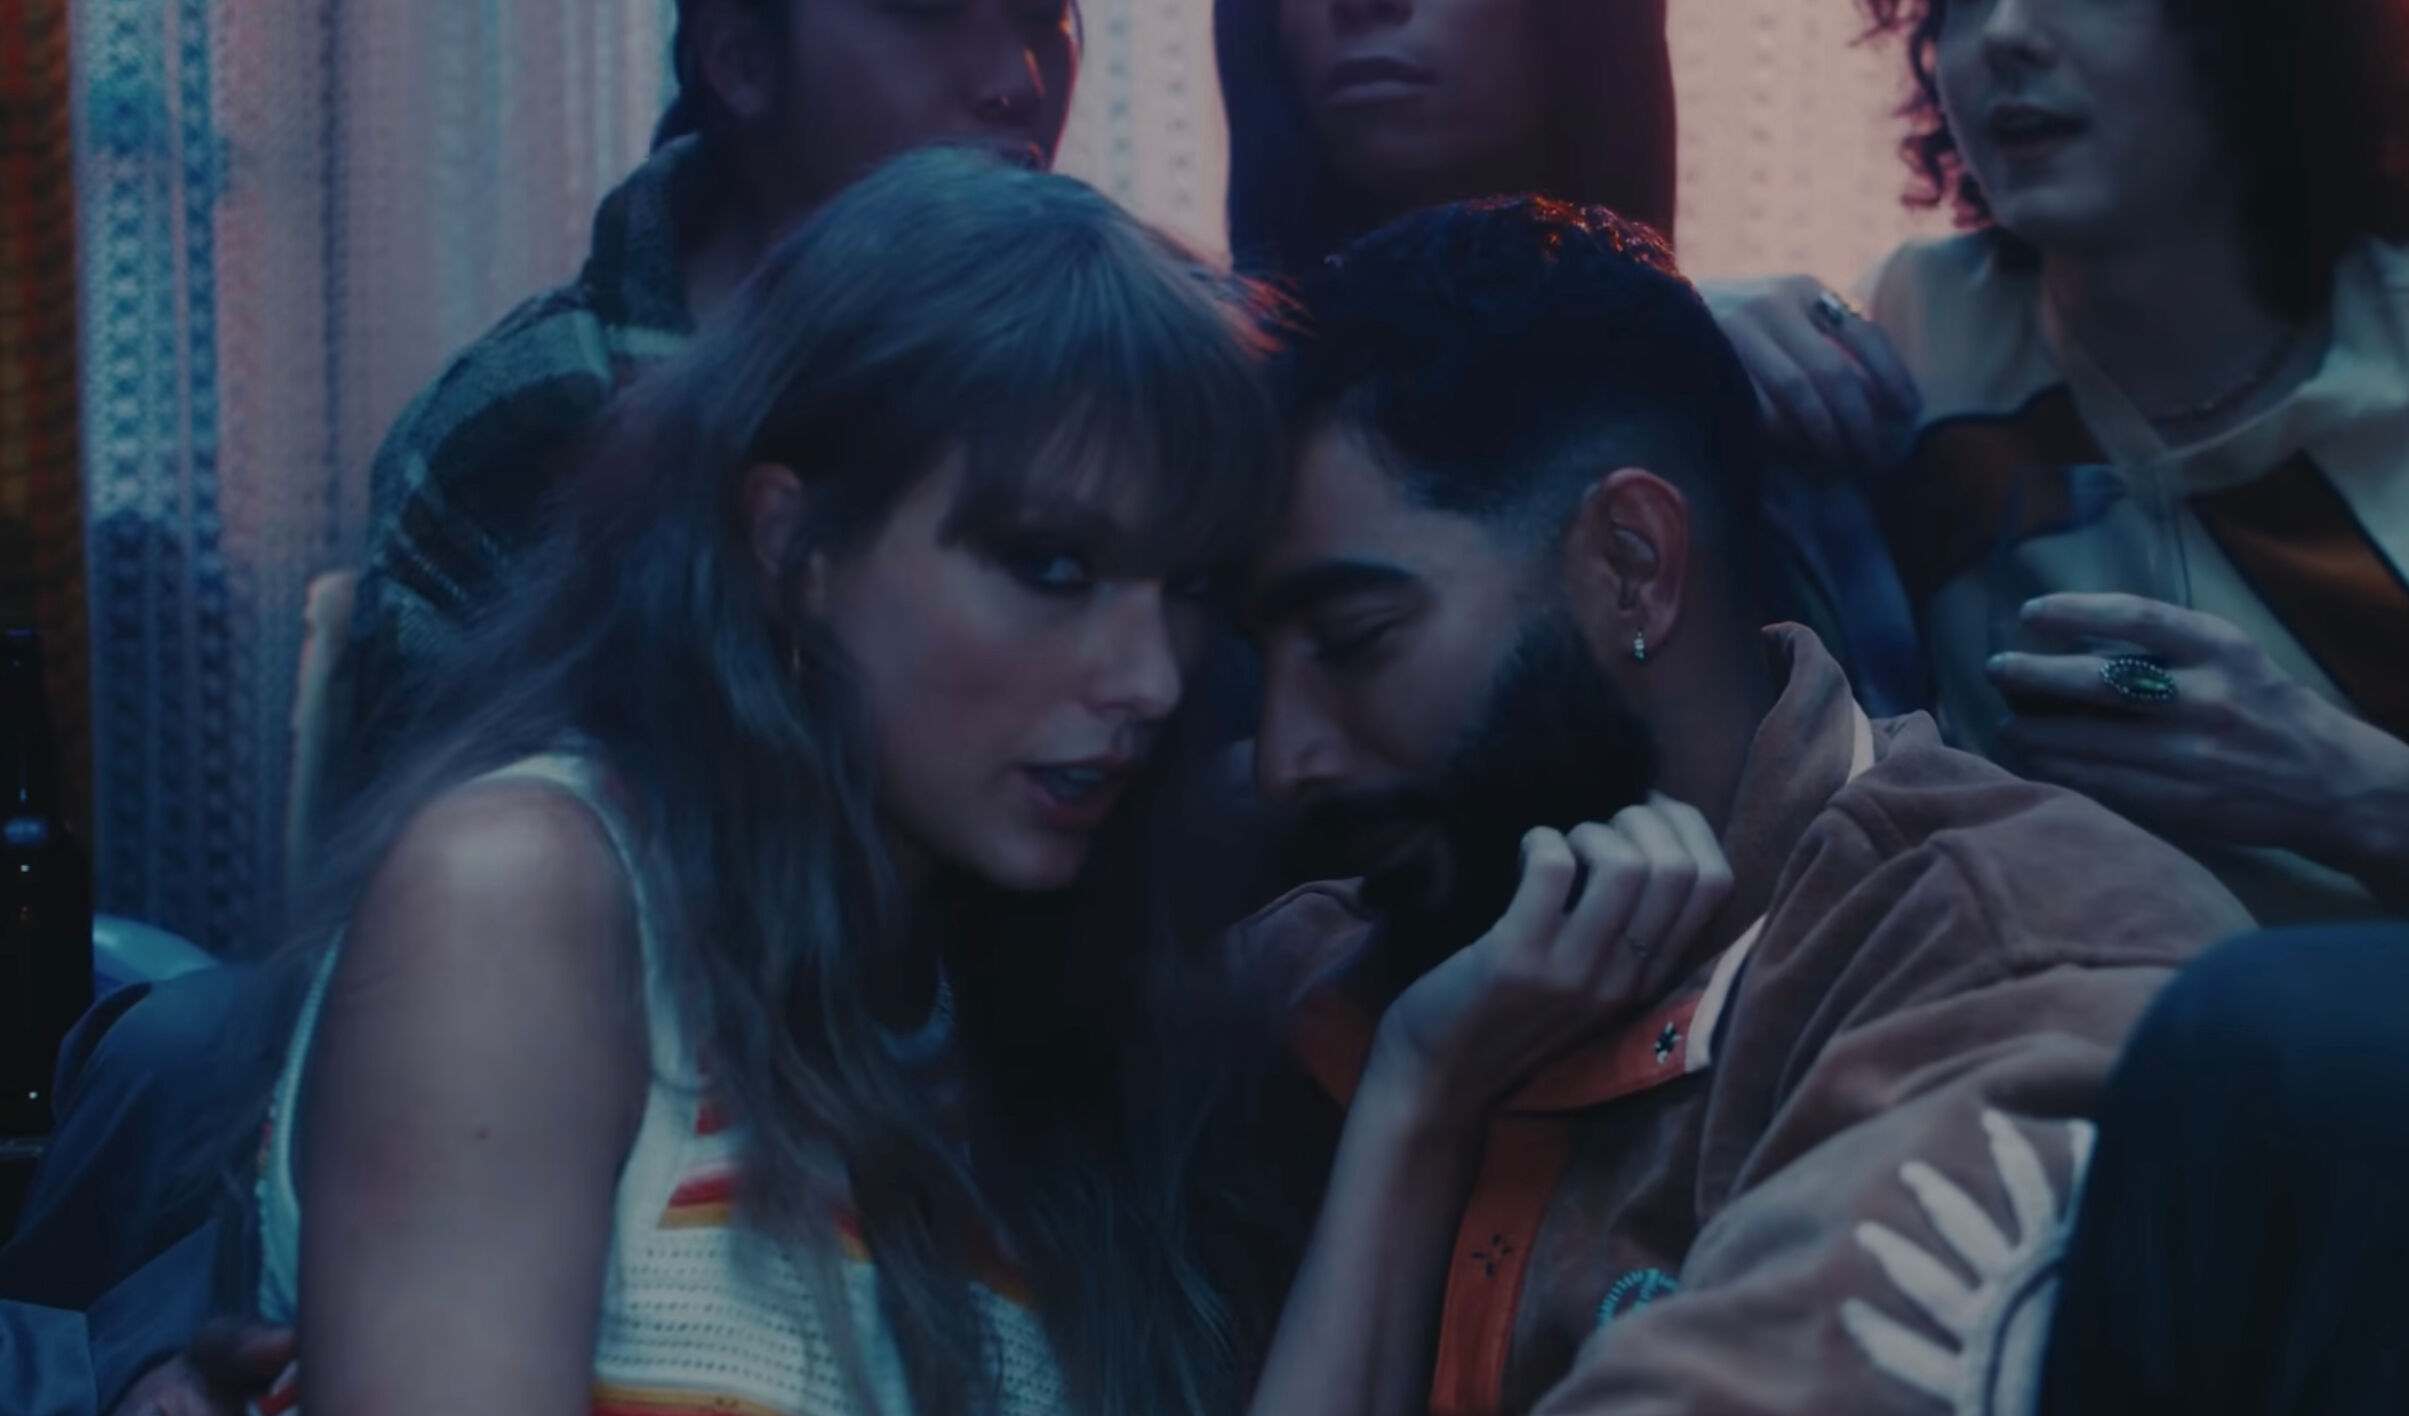 Trans model Laith Ashley co-stars as Taylor Swift’s love interest in new music video